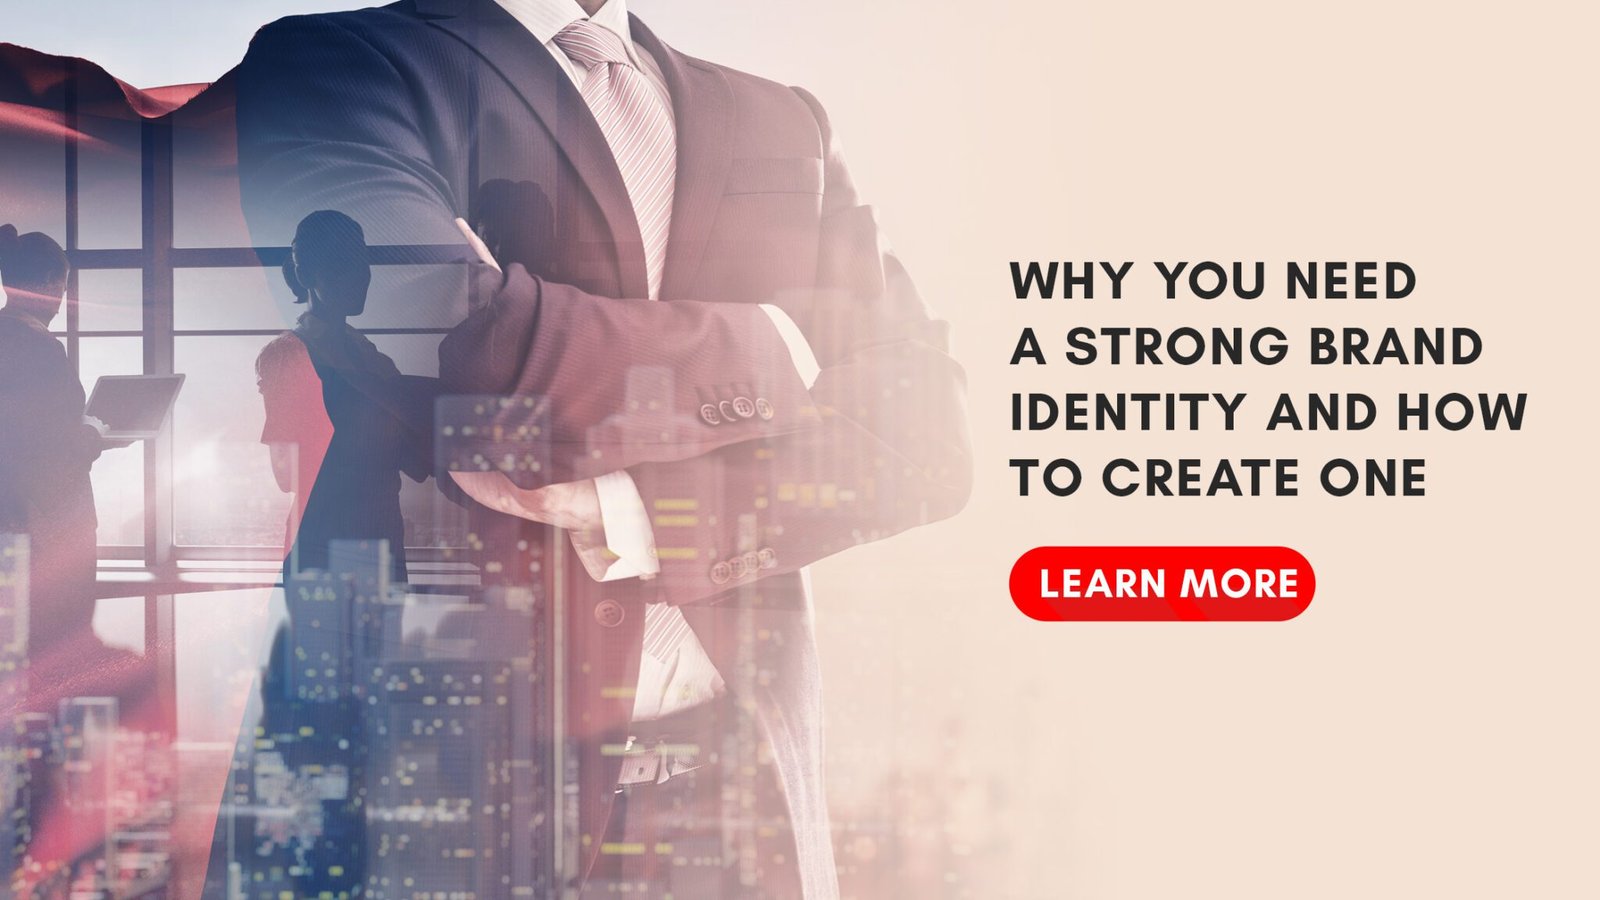 Why you need a strong brand identity and how to create one